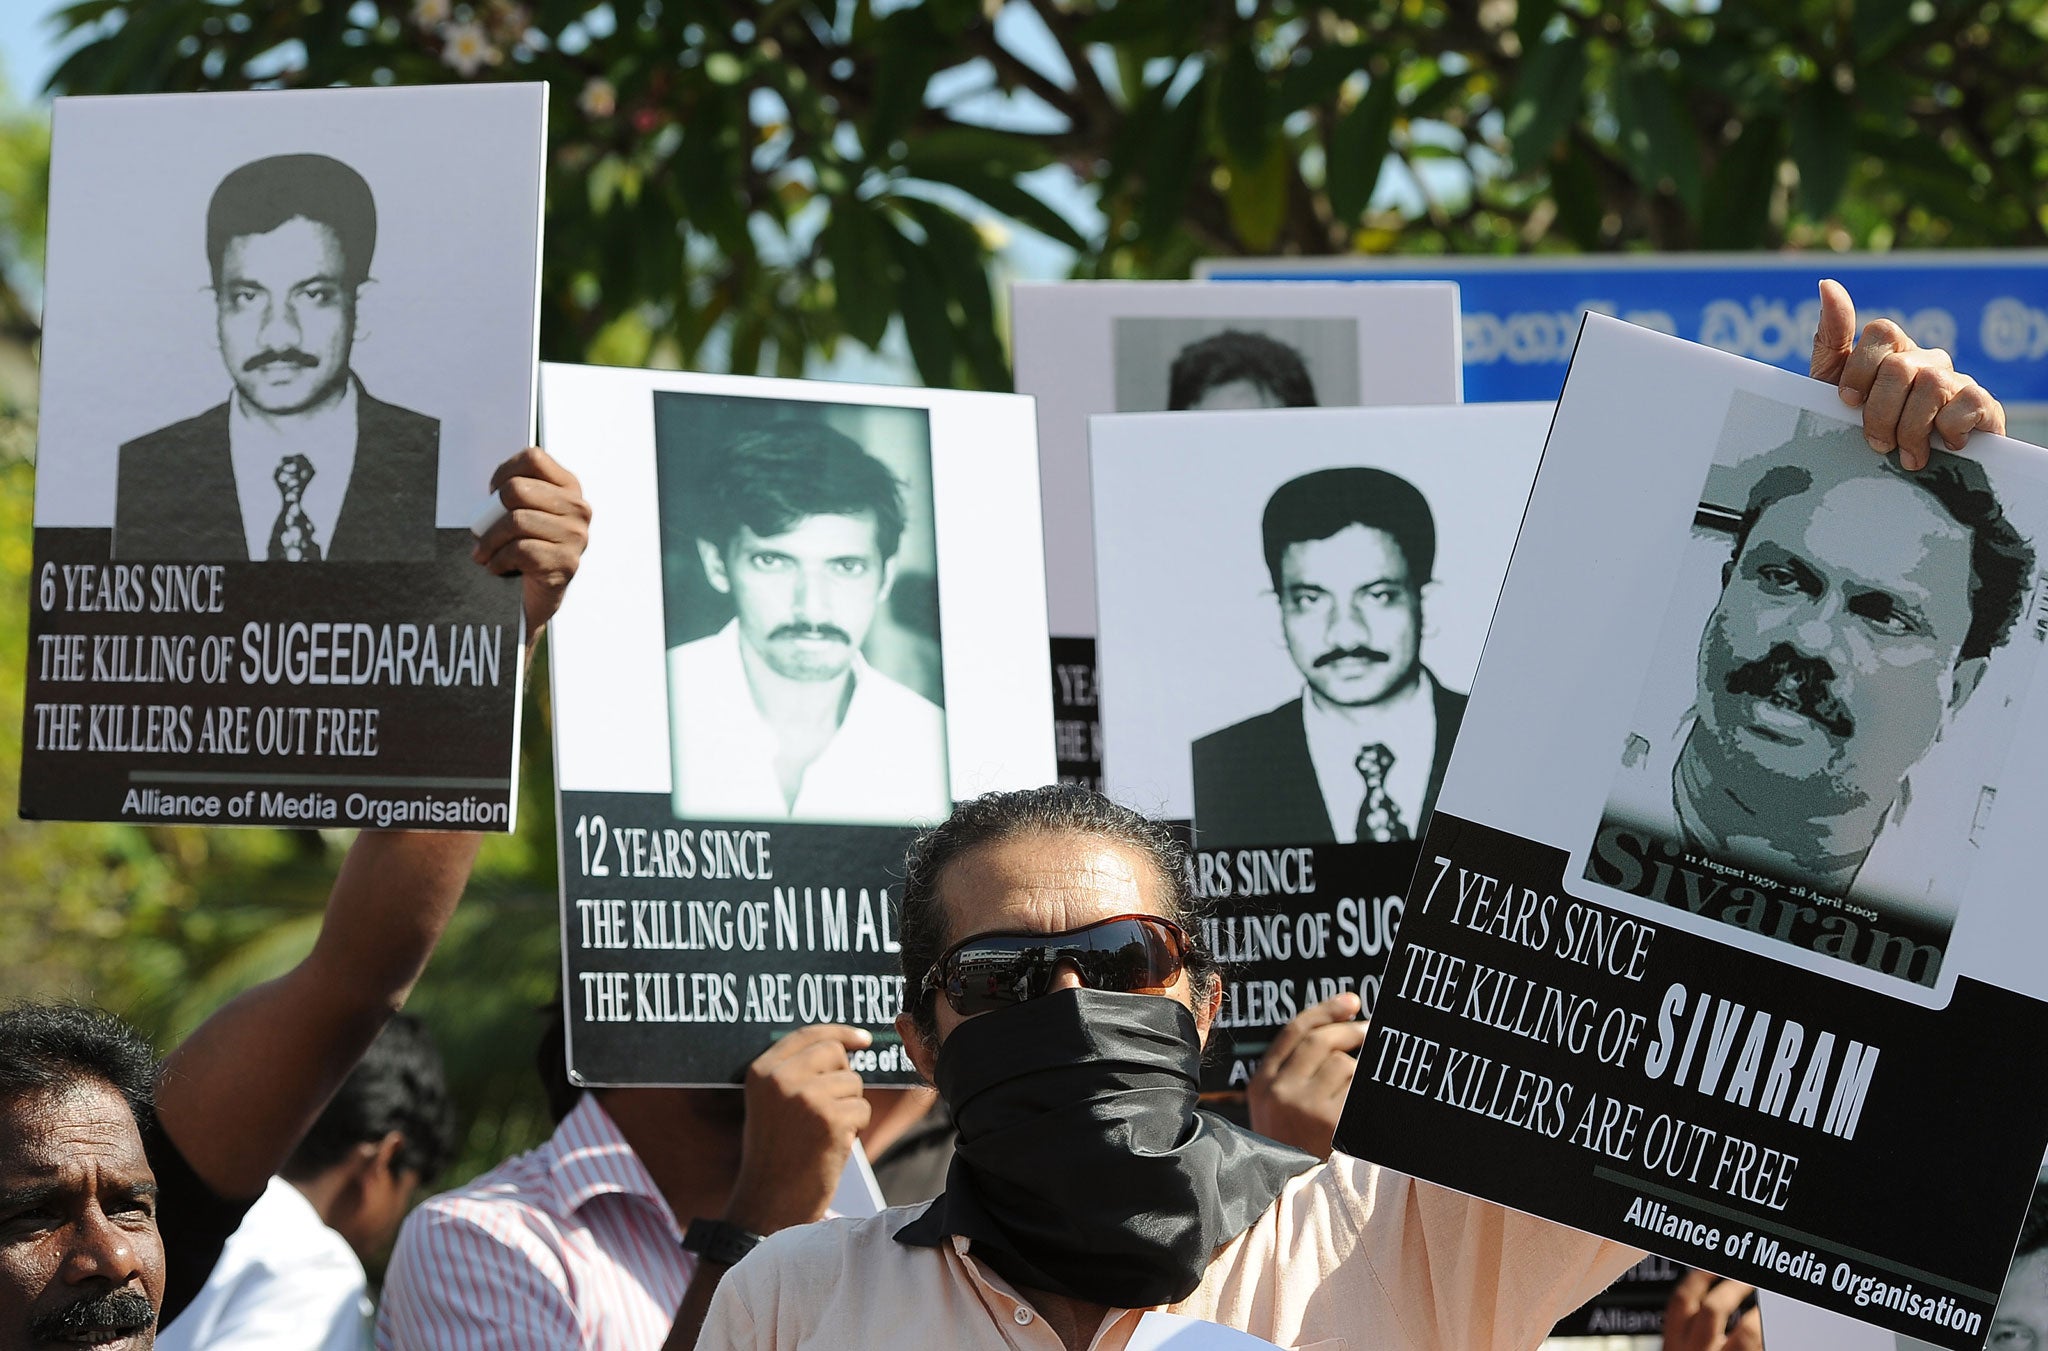 Sri Lankan journalists and media activists demonstrate, demanding investigations into over a dozen killings of editors, reporters and newspaper workers in recent years, in the capital Colombo